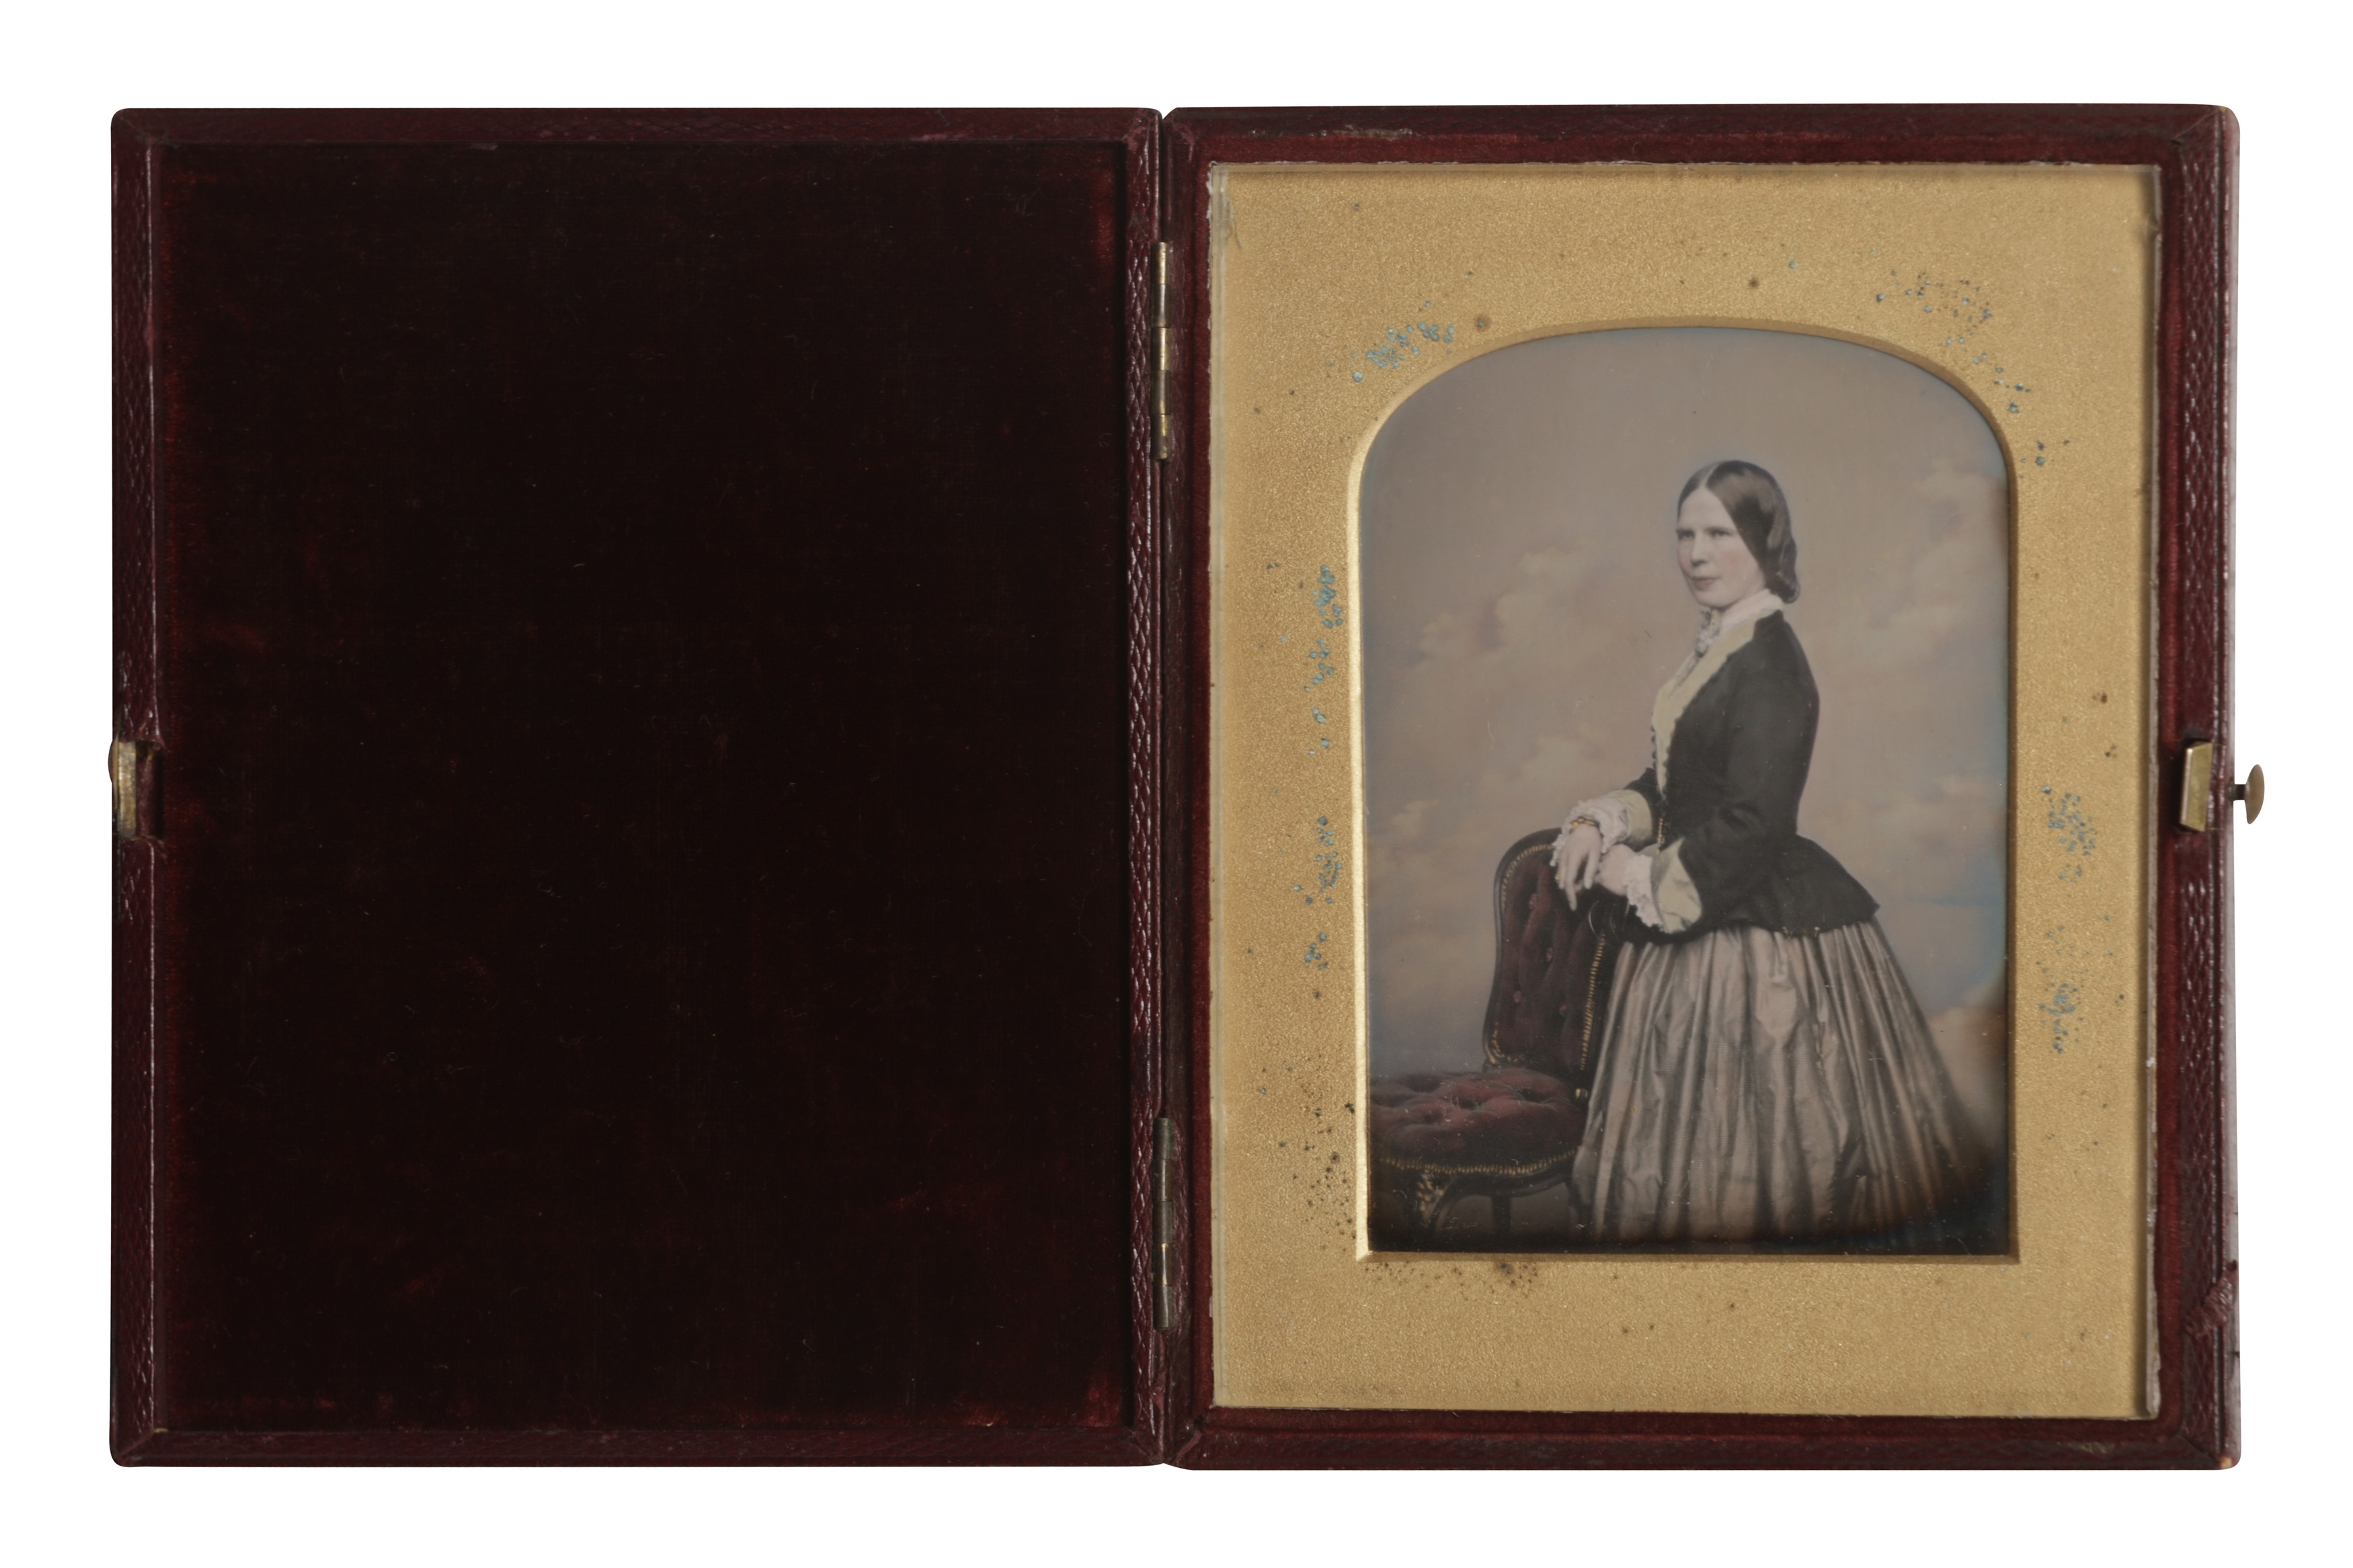 Artwork by William Edward Kilburn, A COLLECTION OF DAGUERREOTYPE PORTRAITS c.1850, Made of DAGUERREOTYPE